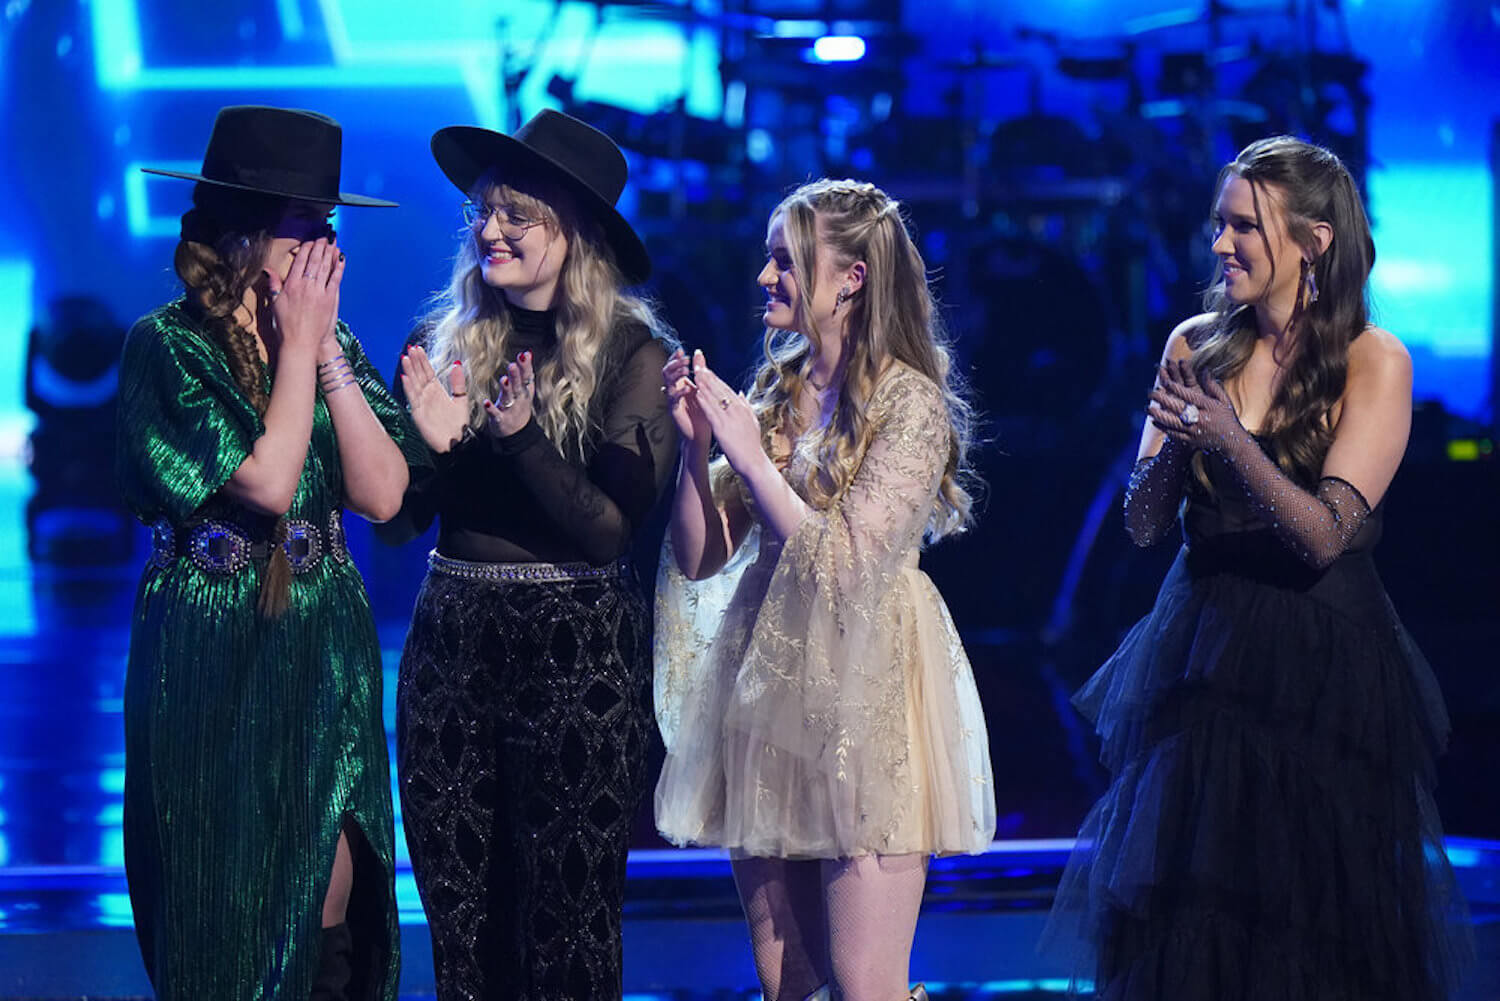 Grace West, Kylee Dayne, Mary Kate Connor, and Rachel Christine standing on stage in 'The Voice' Season 23 for the top 8